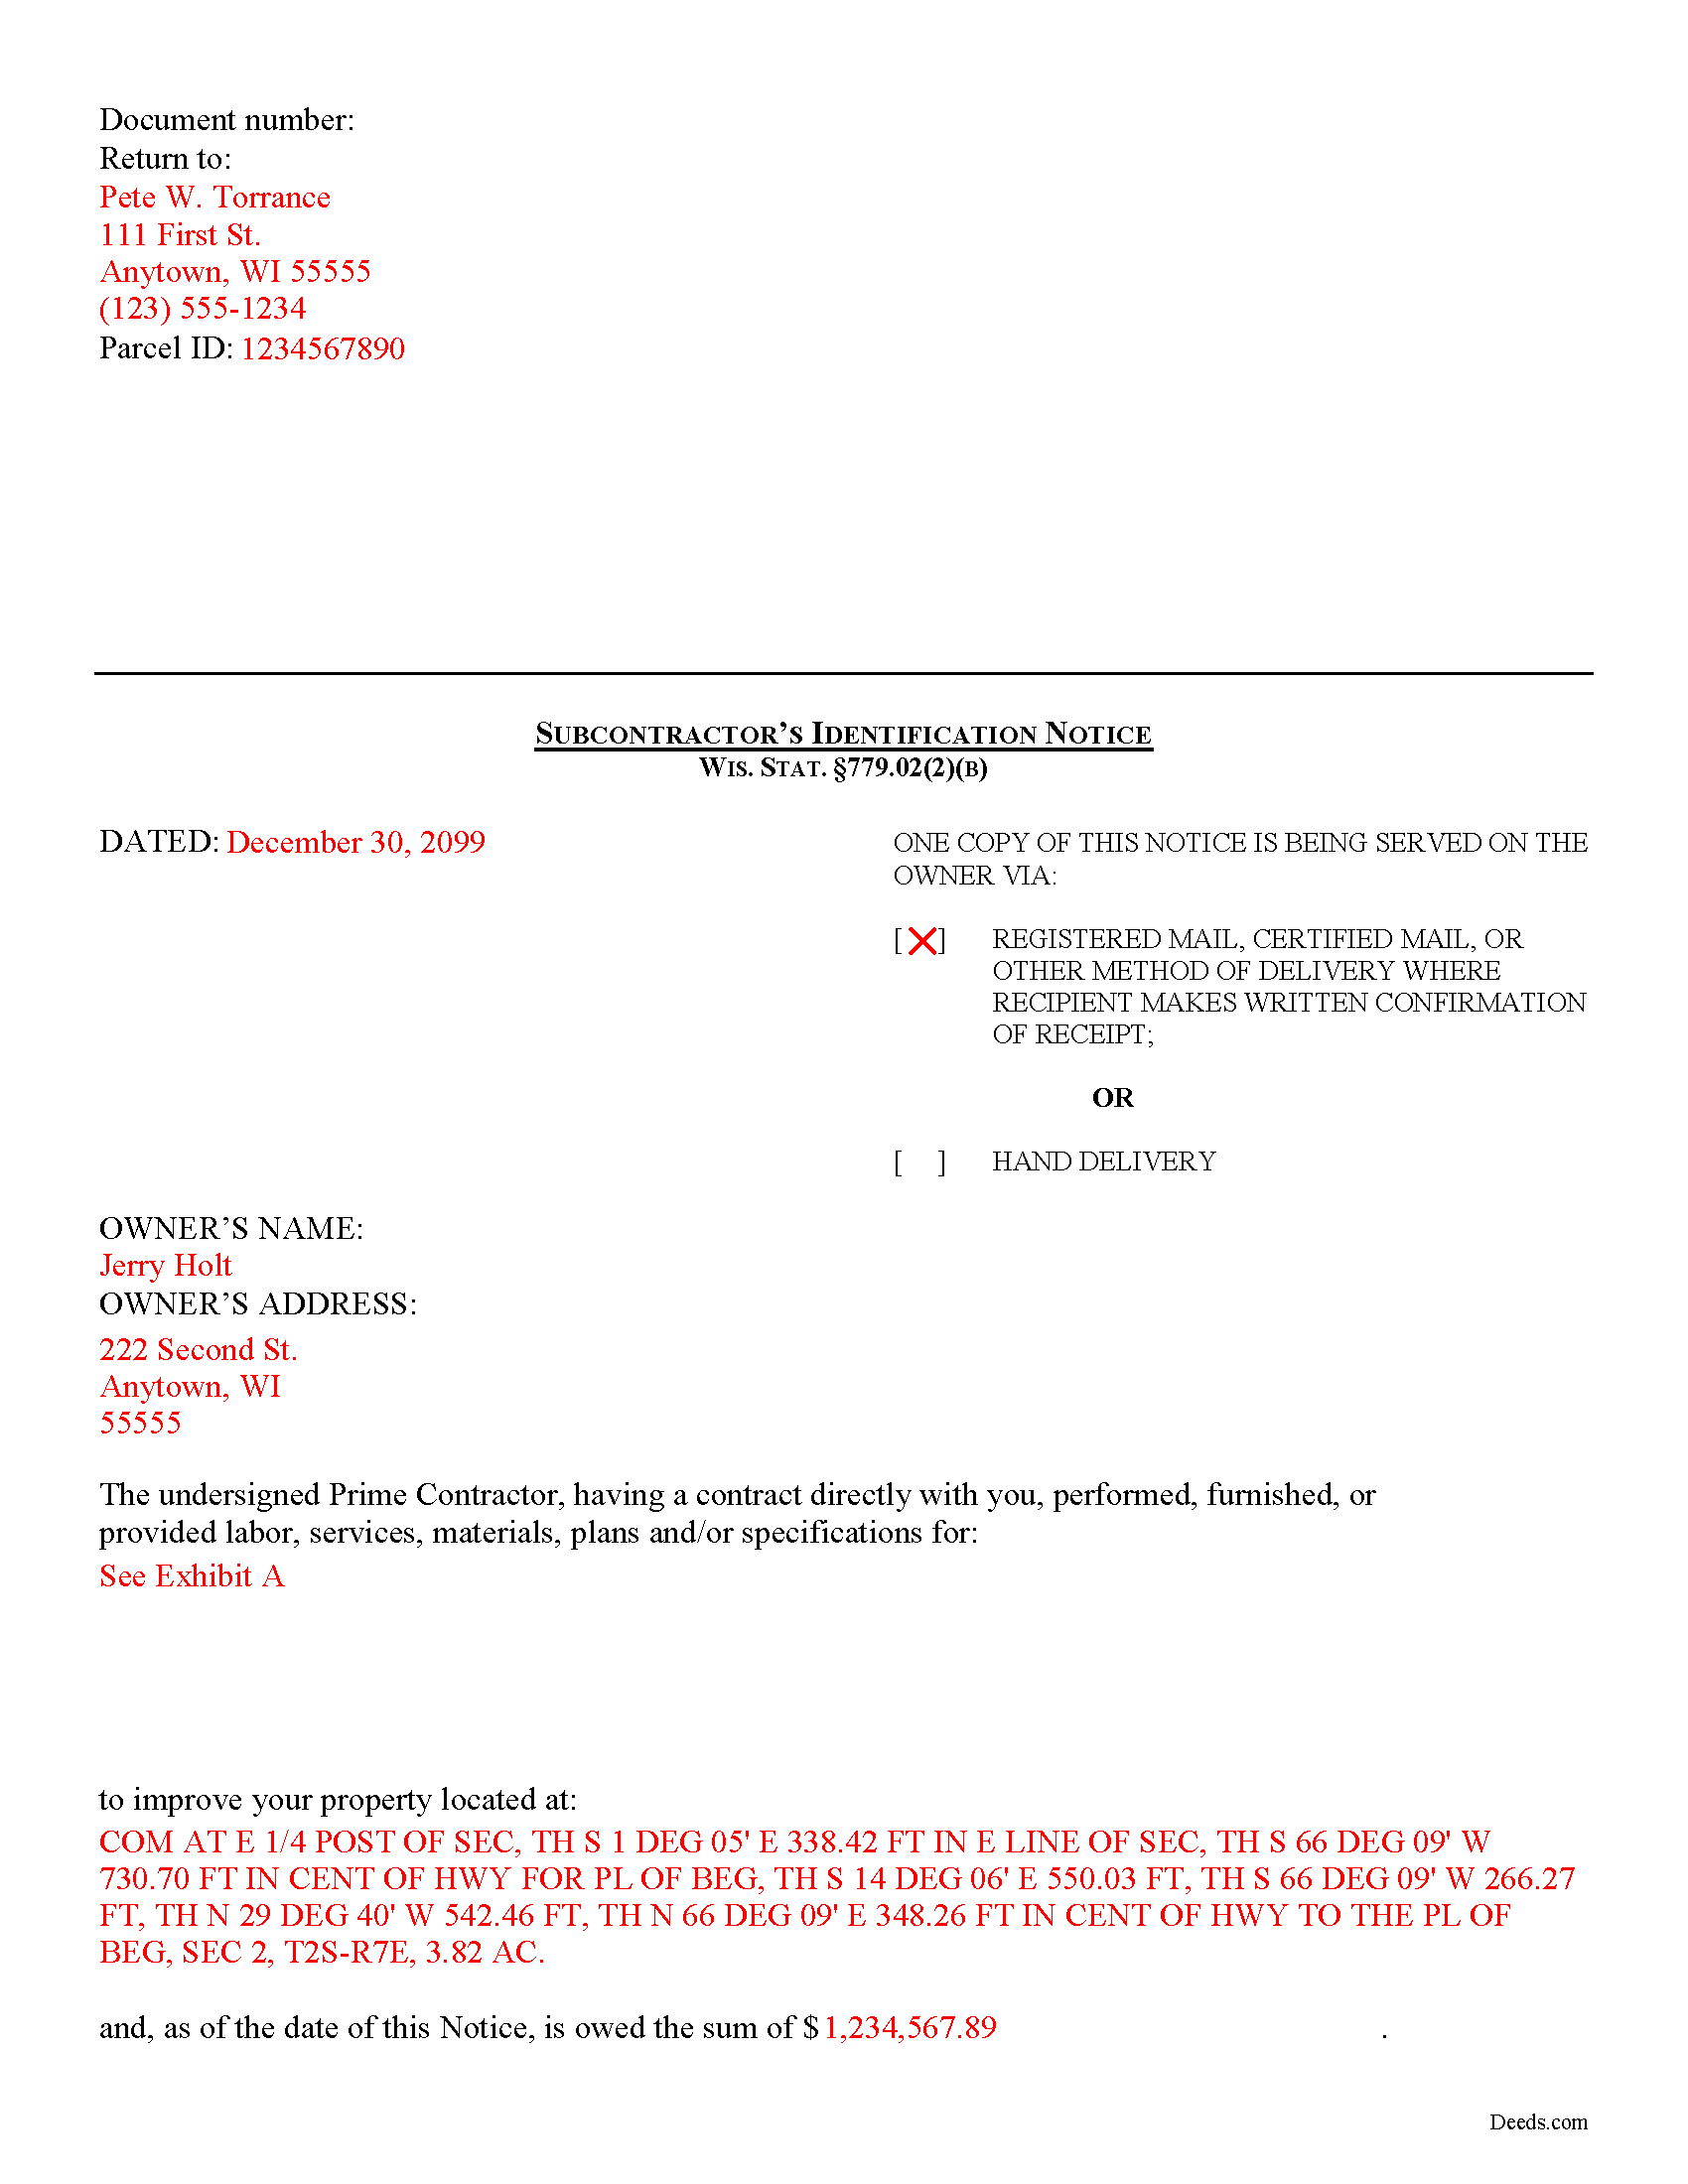 Completed Example of the Subcontractor Indentification Notice Document